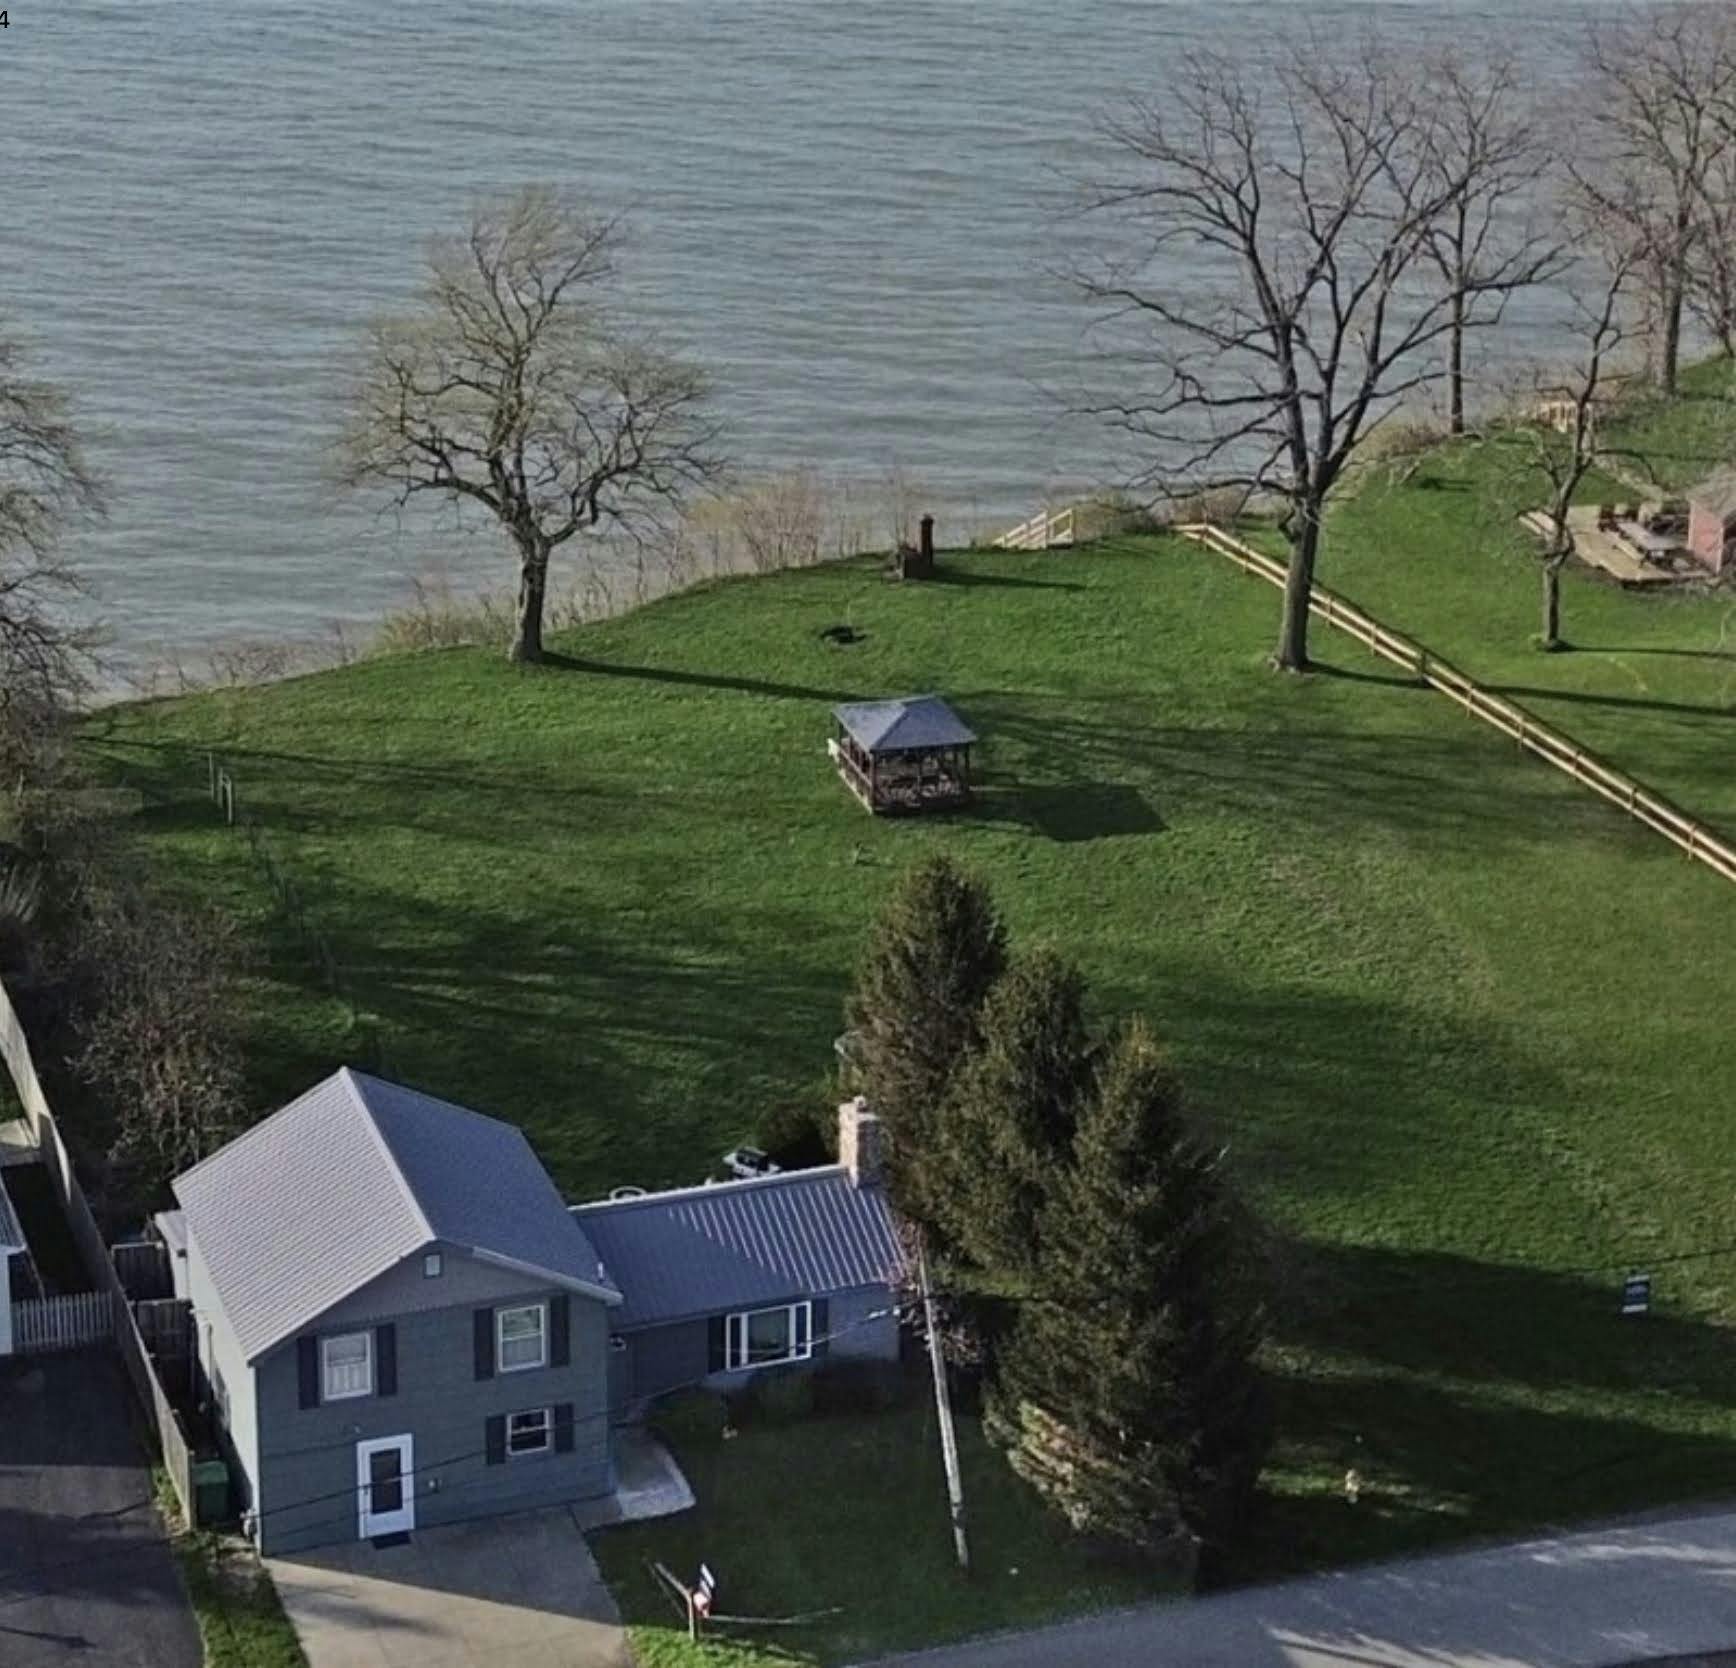 Take in the full northern view of this private property on Lake Erie situated in the quaint area of North East Pennsylvania.